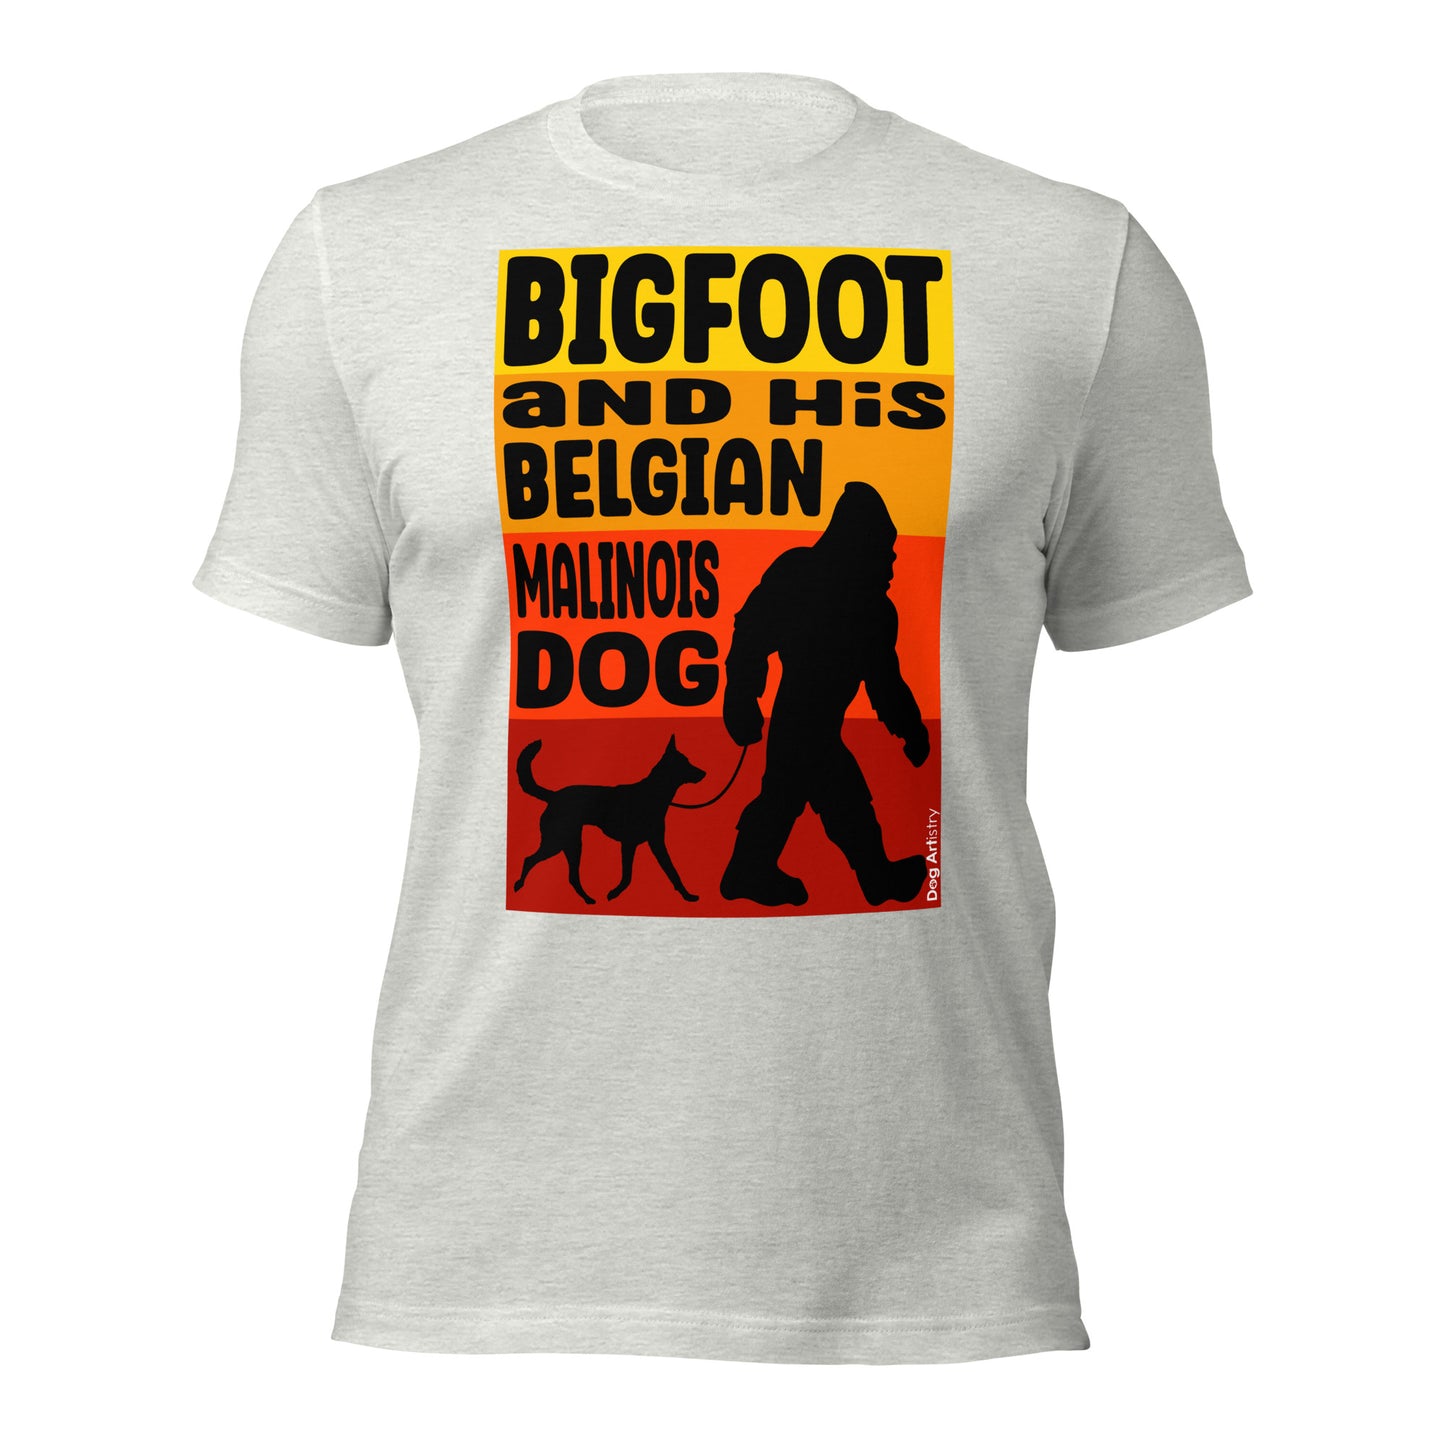 Big foot and his Belgian Malinois unisex ash t-shirt by Dog Artistry.